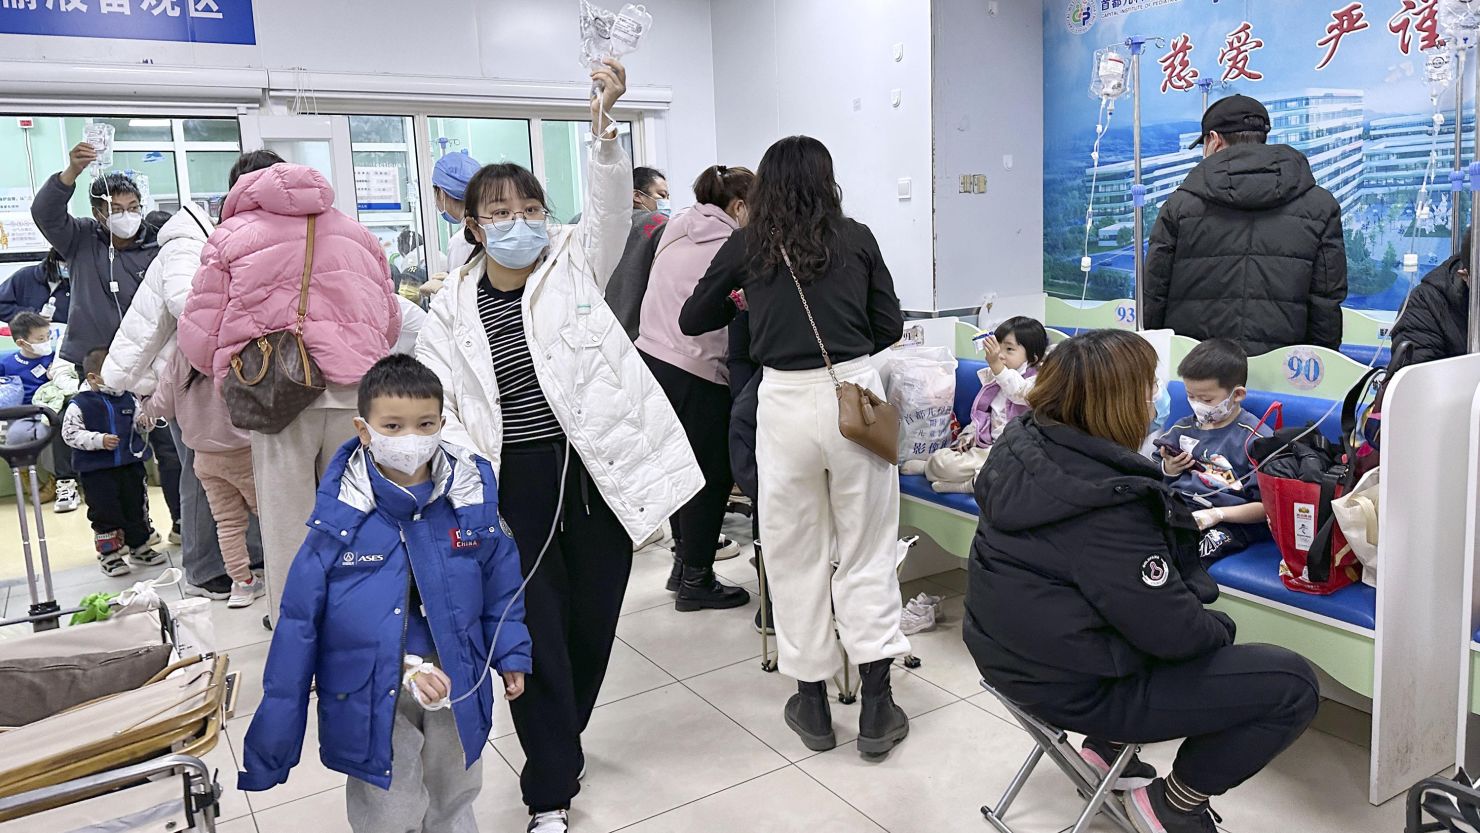 Children are hooked up to intravenous drips at a hospital in Beijing on Nov. 29, 2023, amid a pneumonia outbreak among children in the country. (Photo by Kyodo News via Getty Images)